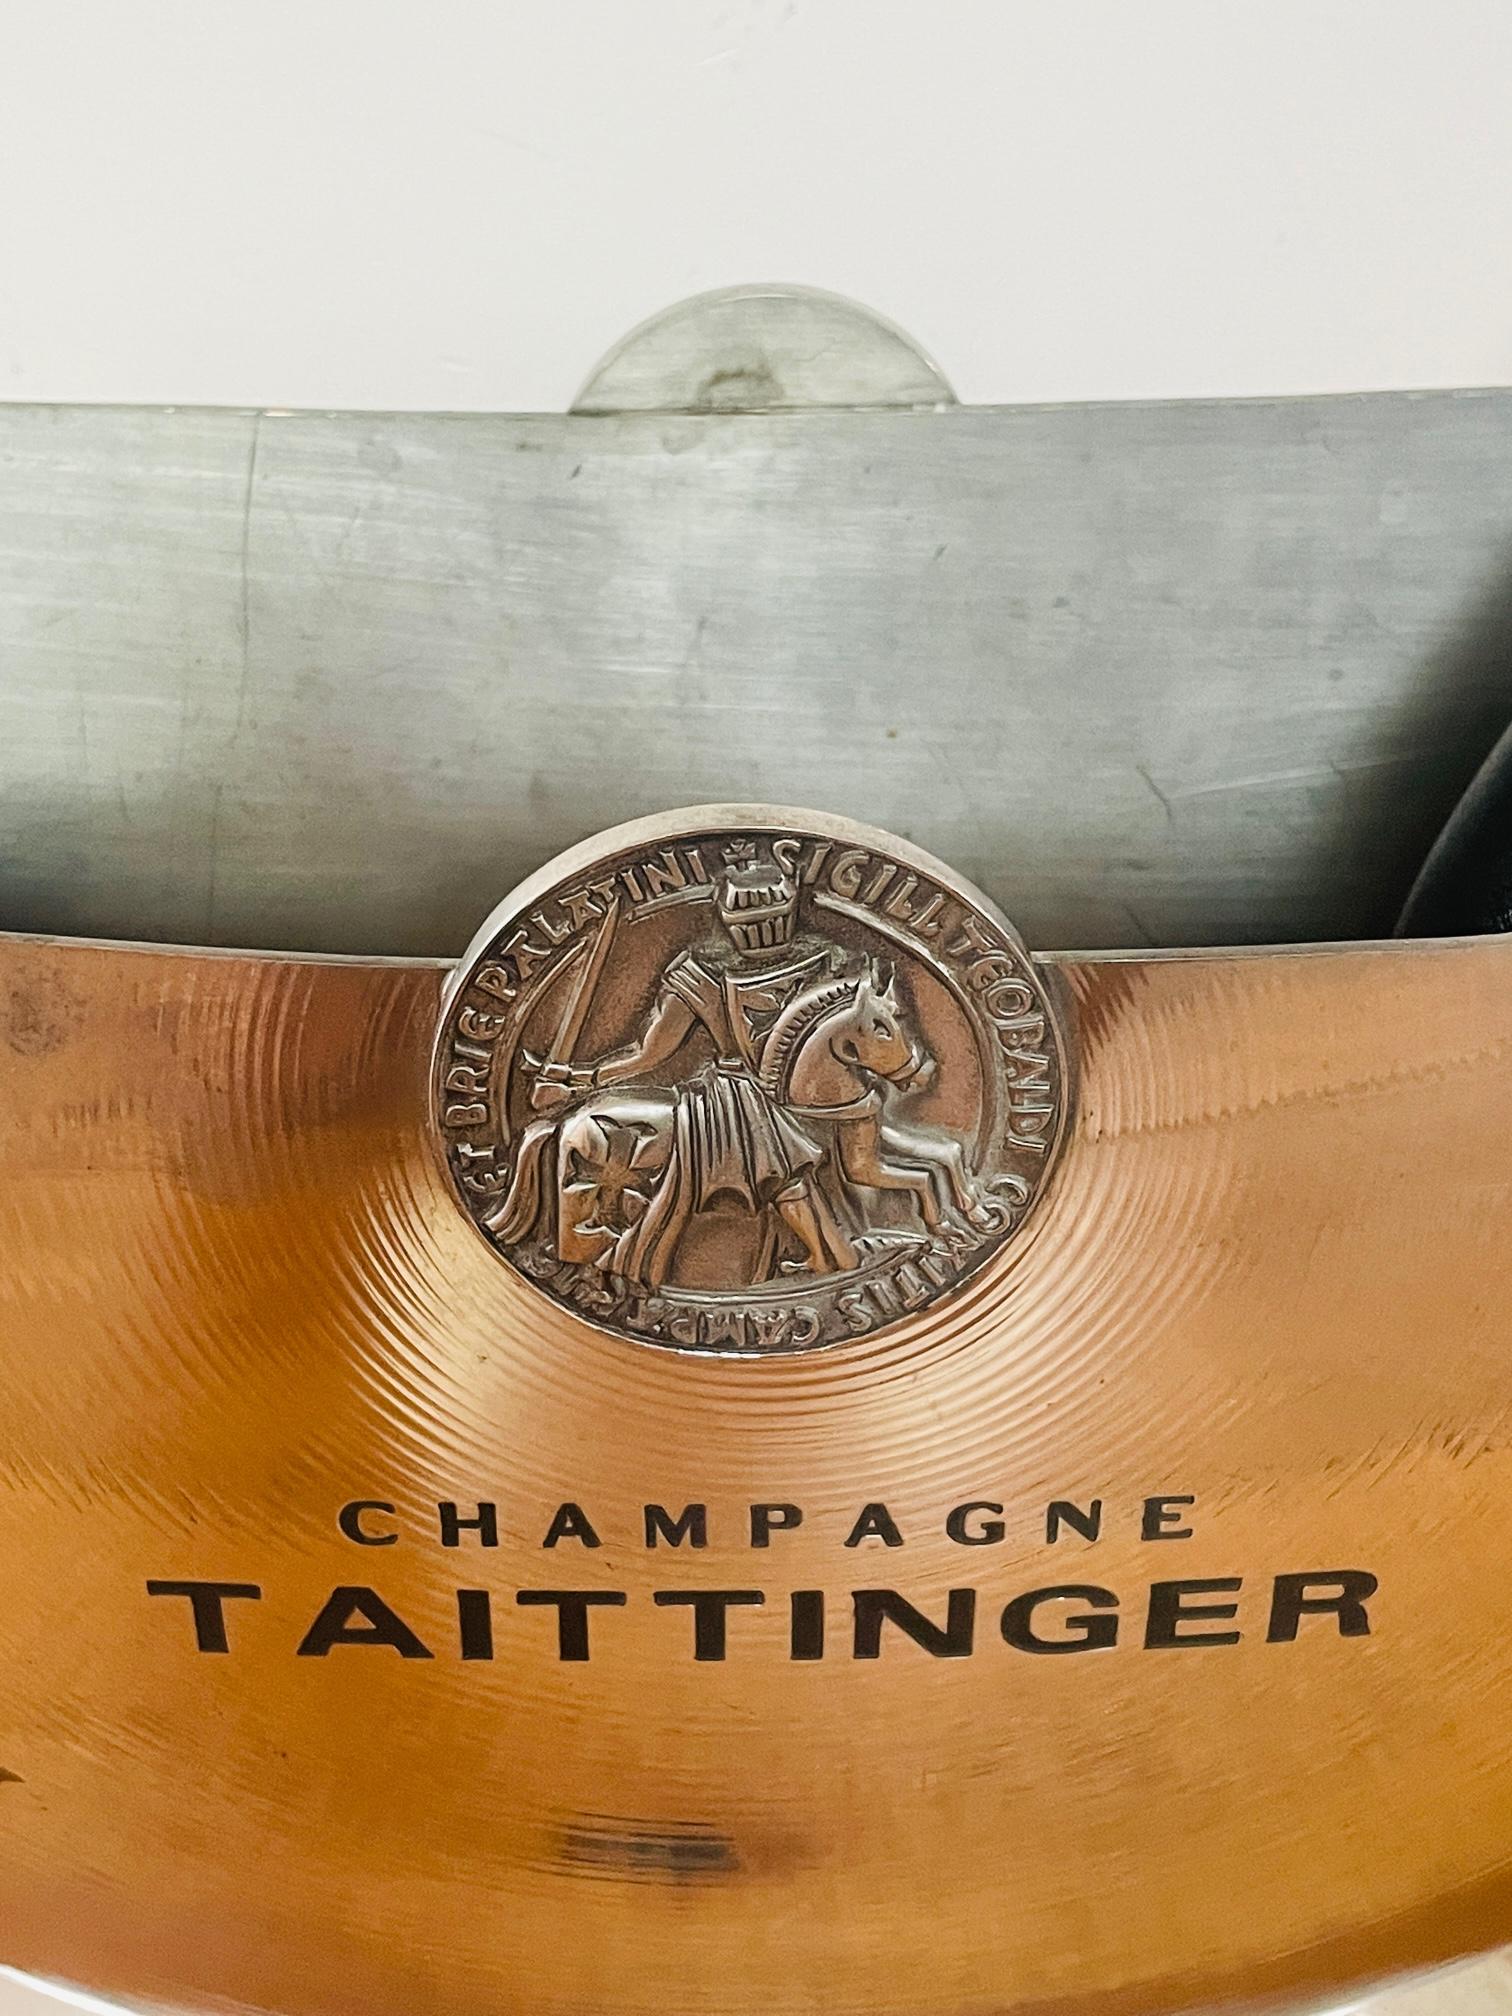 Taittinger half-moon Champagne bowl. Beautiful pewter champagne cooler by Etain 3